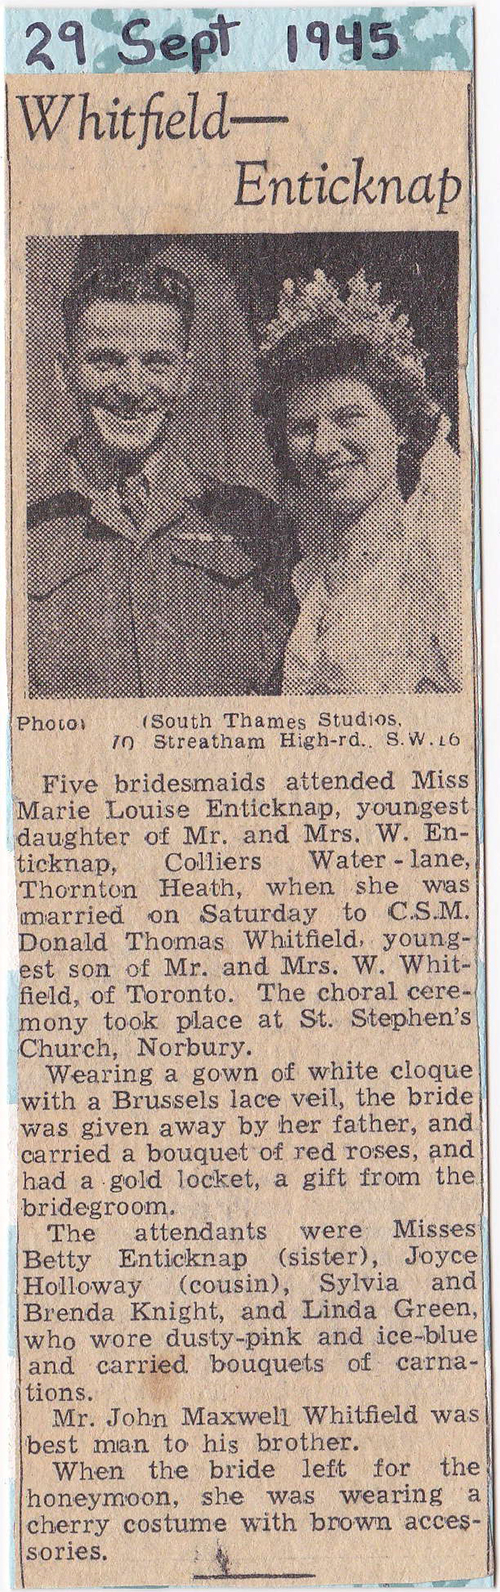 Newspaper clipping of wedded couple with heading of 29th Sept 1945.